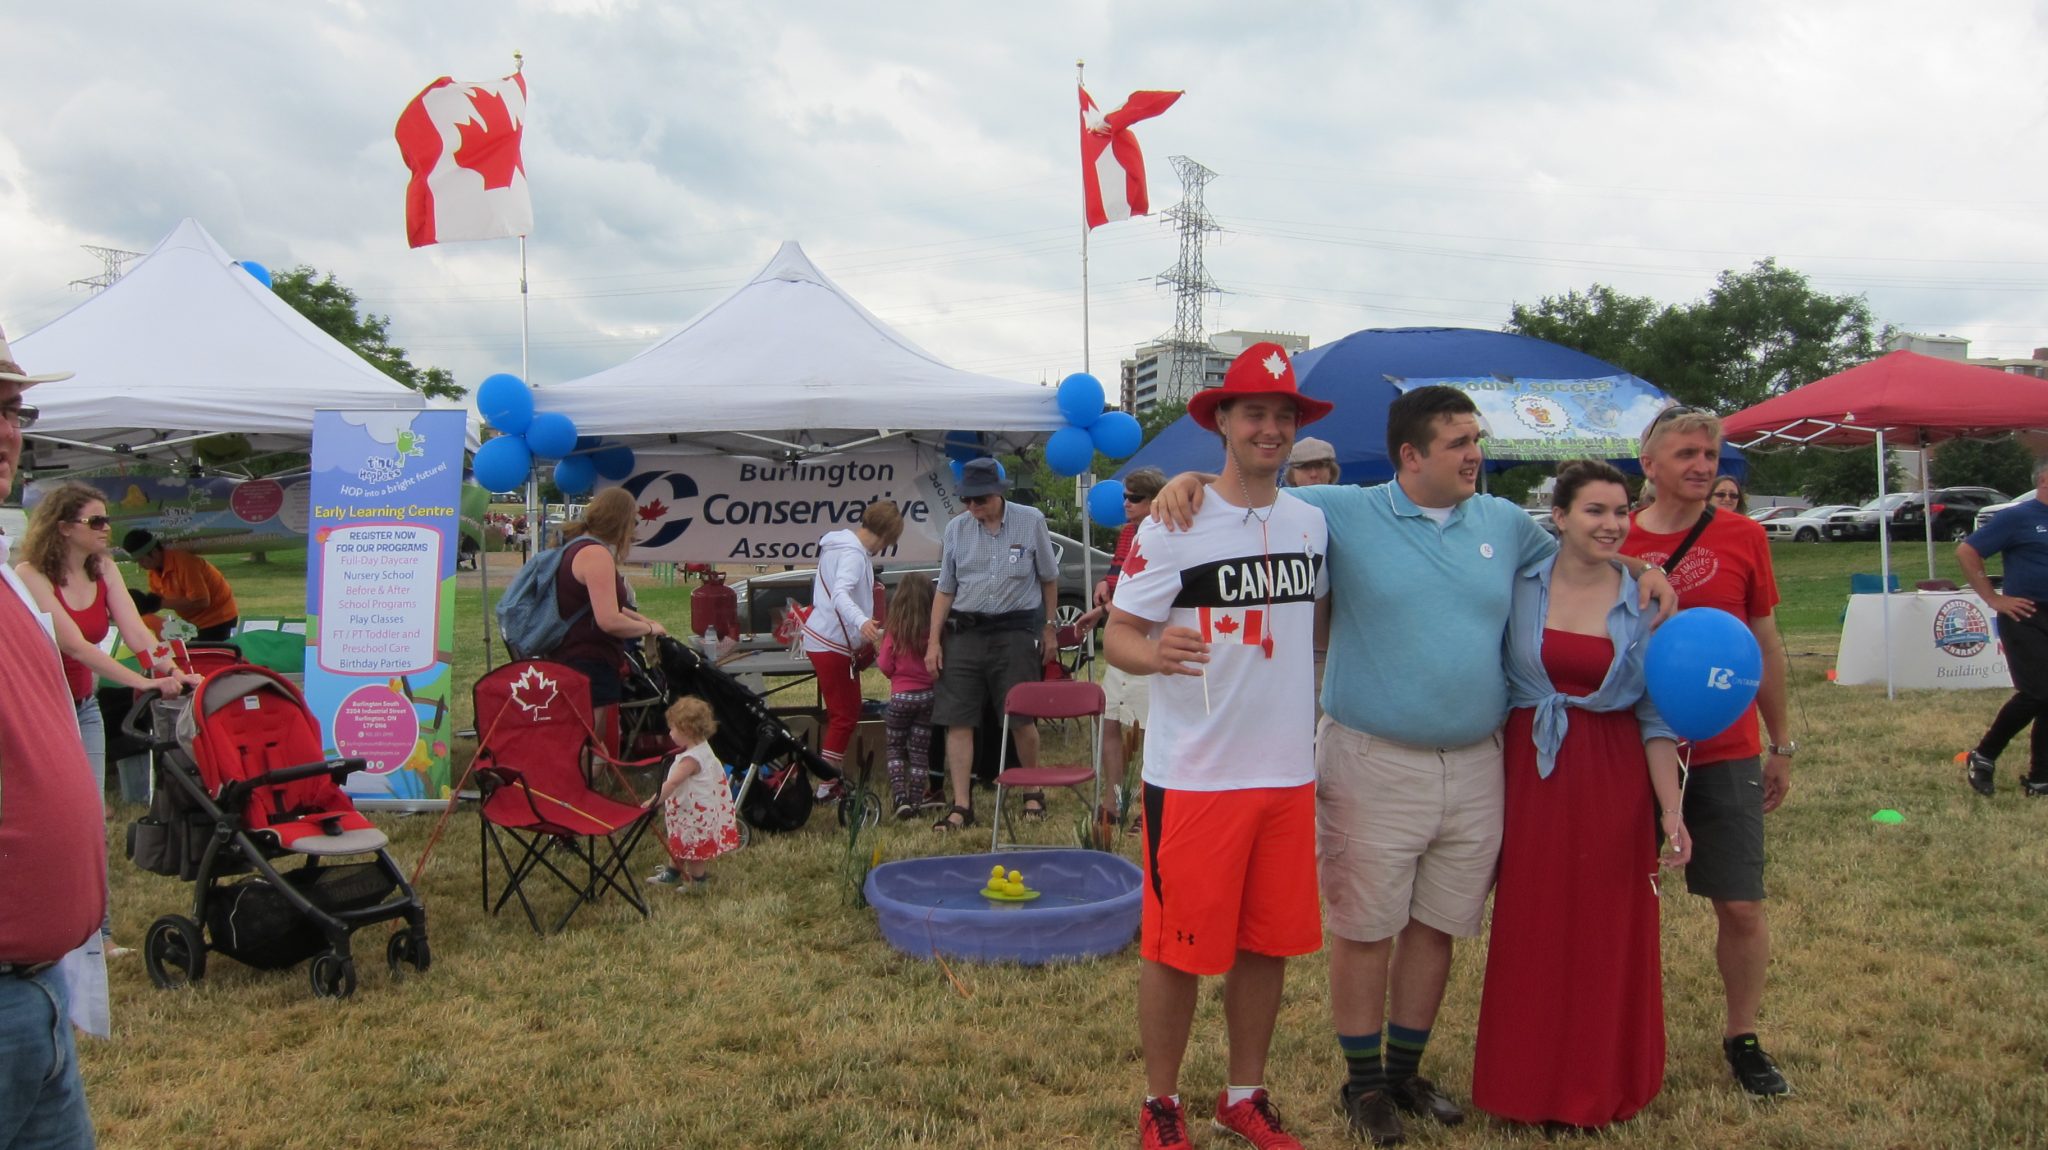 More Canada Day at Spencer Smith Park